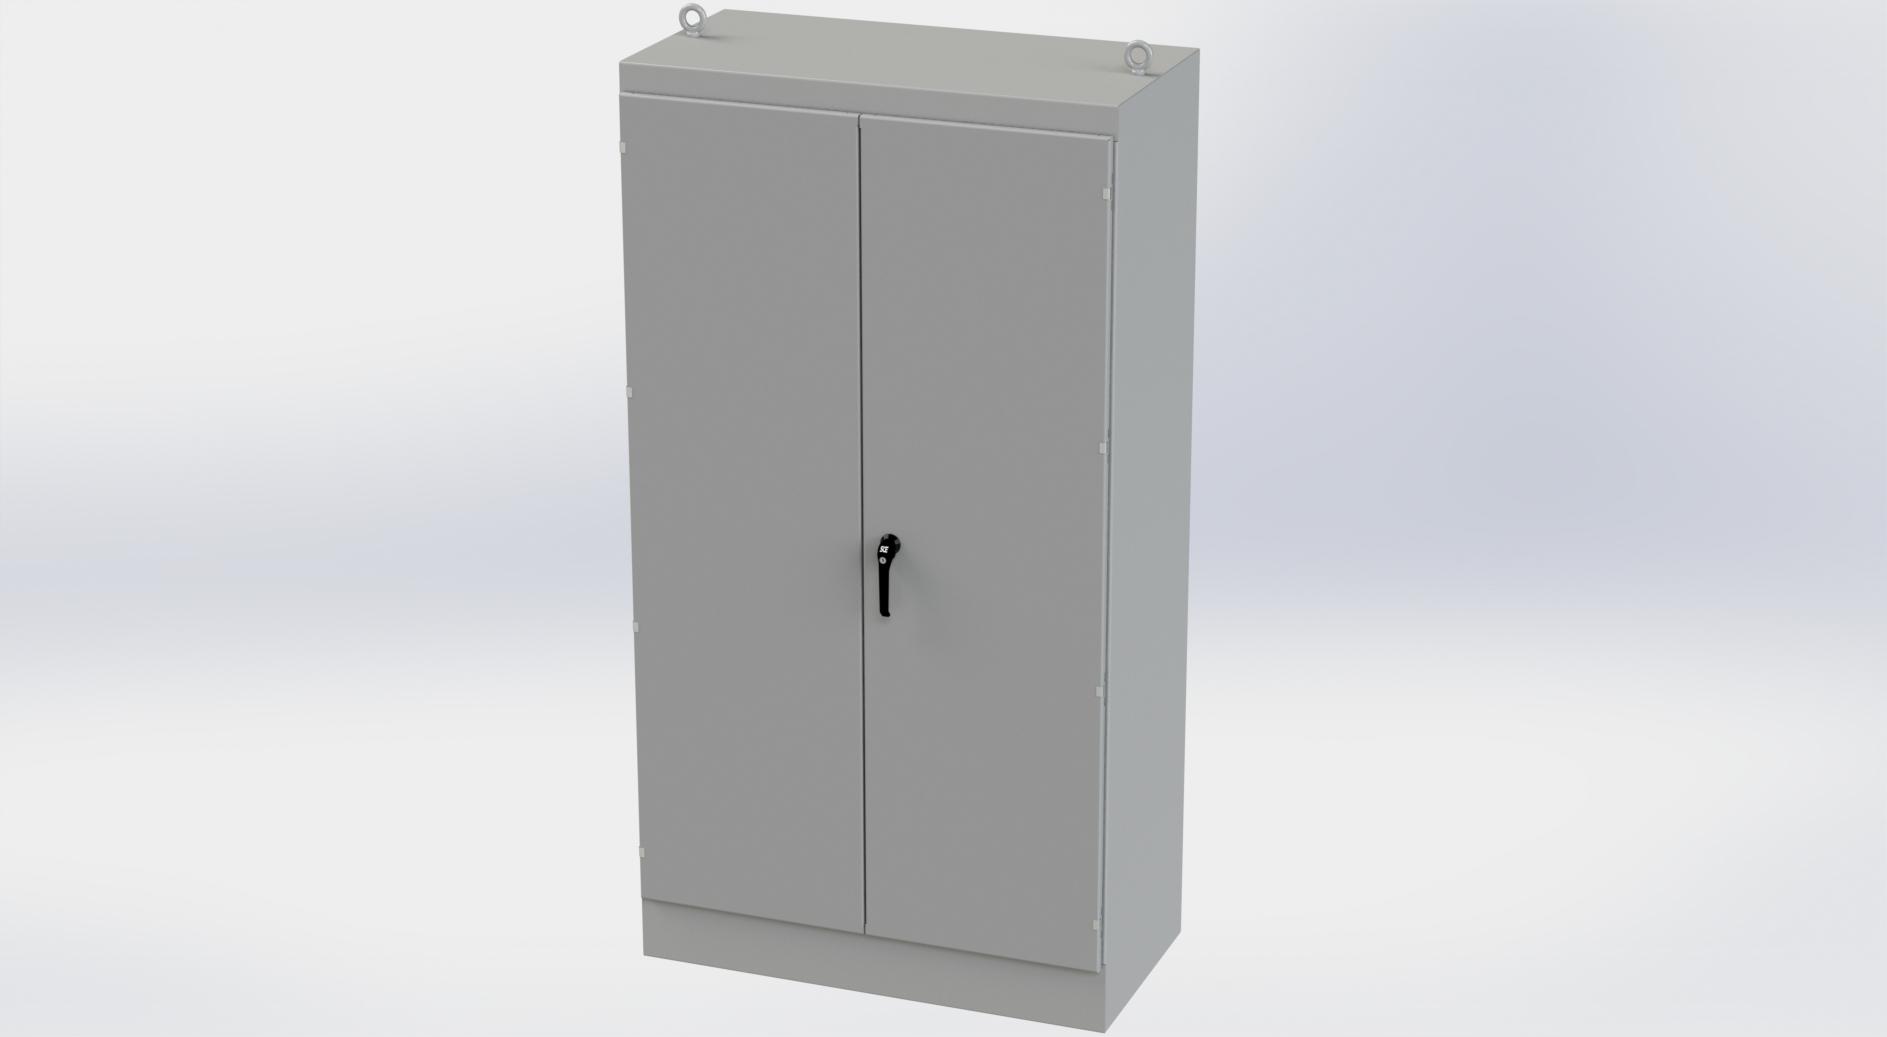 Saginaw Control SCE-904824FSD FSD Enclosure, Height:90.00", Width:48.00", Depth:24.00", ANSI-61 gray finish inside and out. Optional sub-panels are powder coated white.